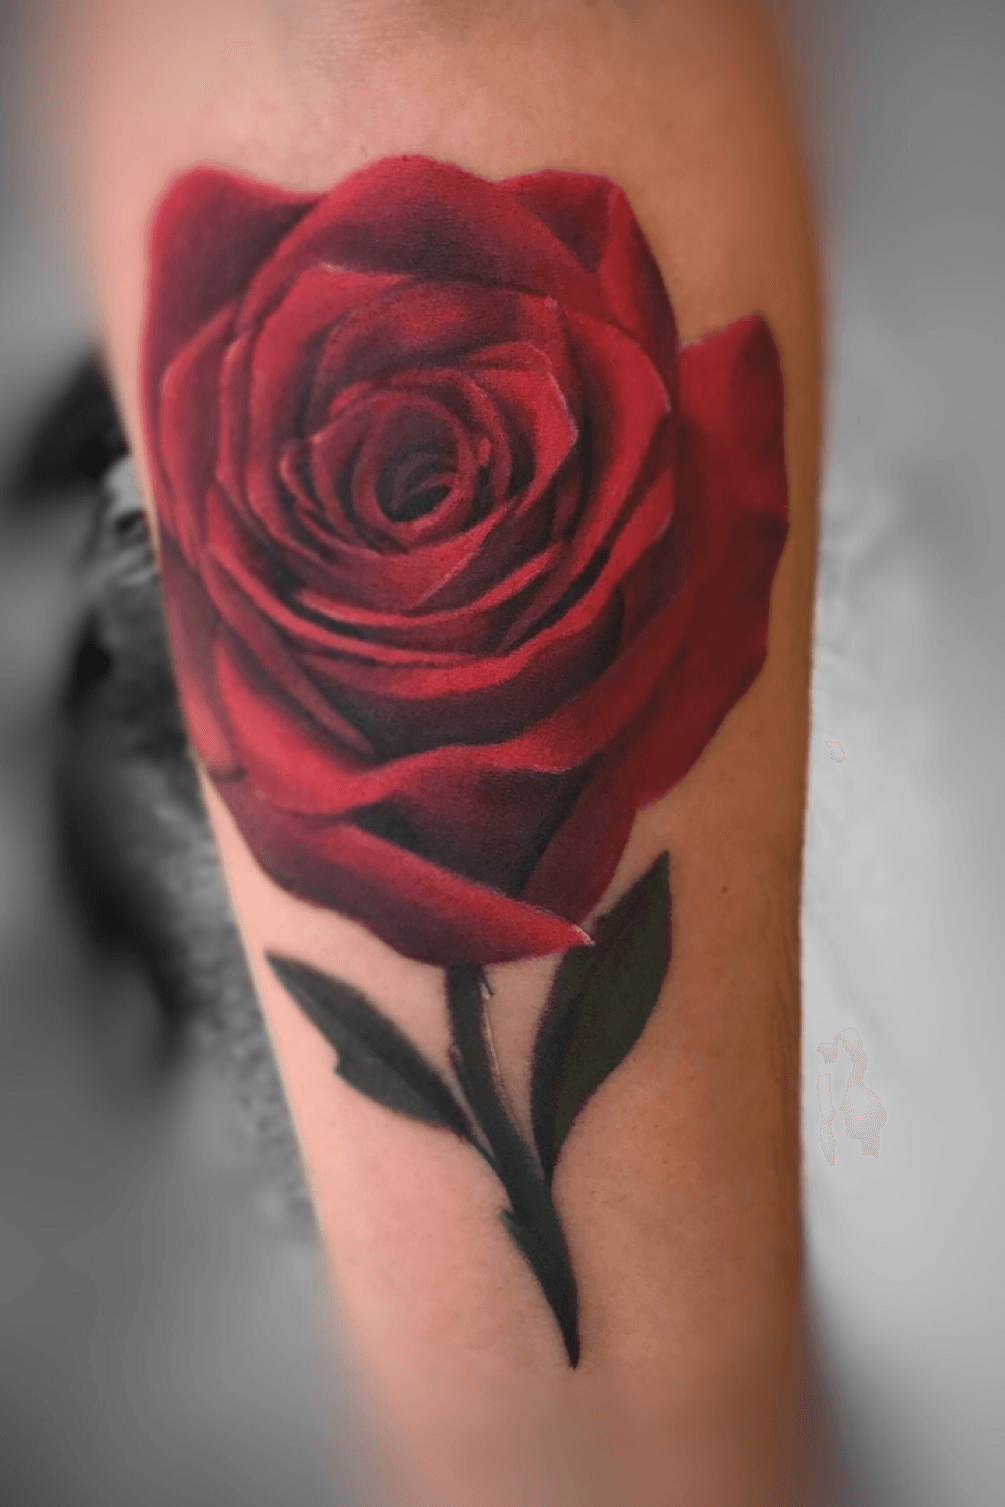 75 Lovable Red Rose Tattoos and Designs With Meanings